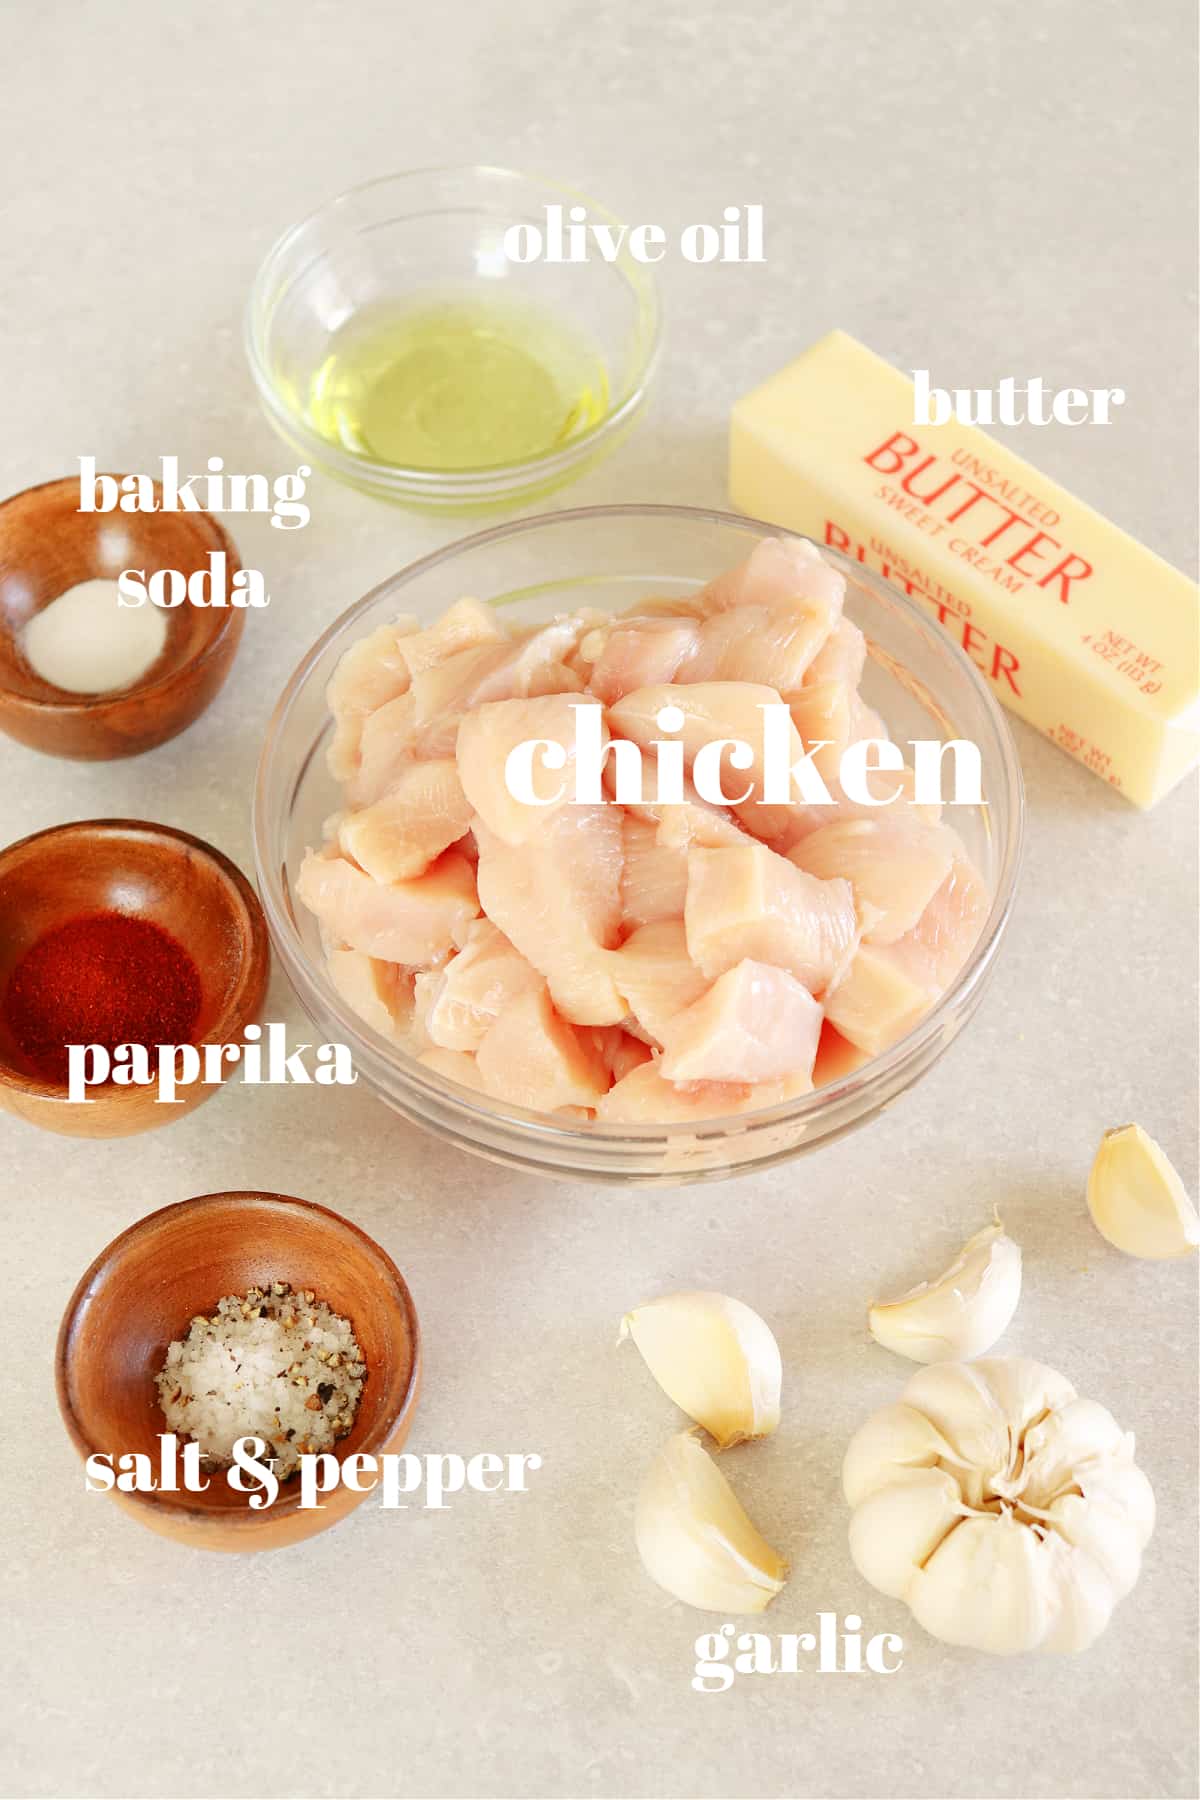 Ingredients for garlic butter chicken recipe on a gray board.